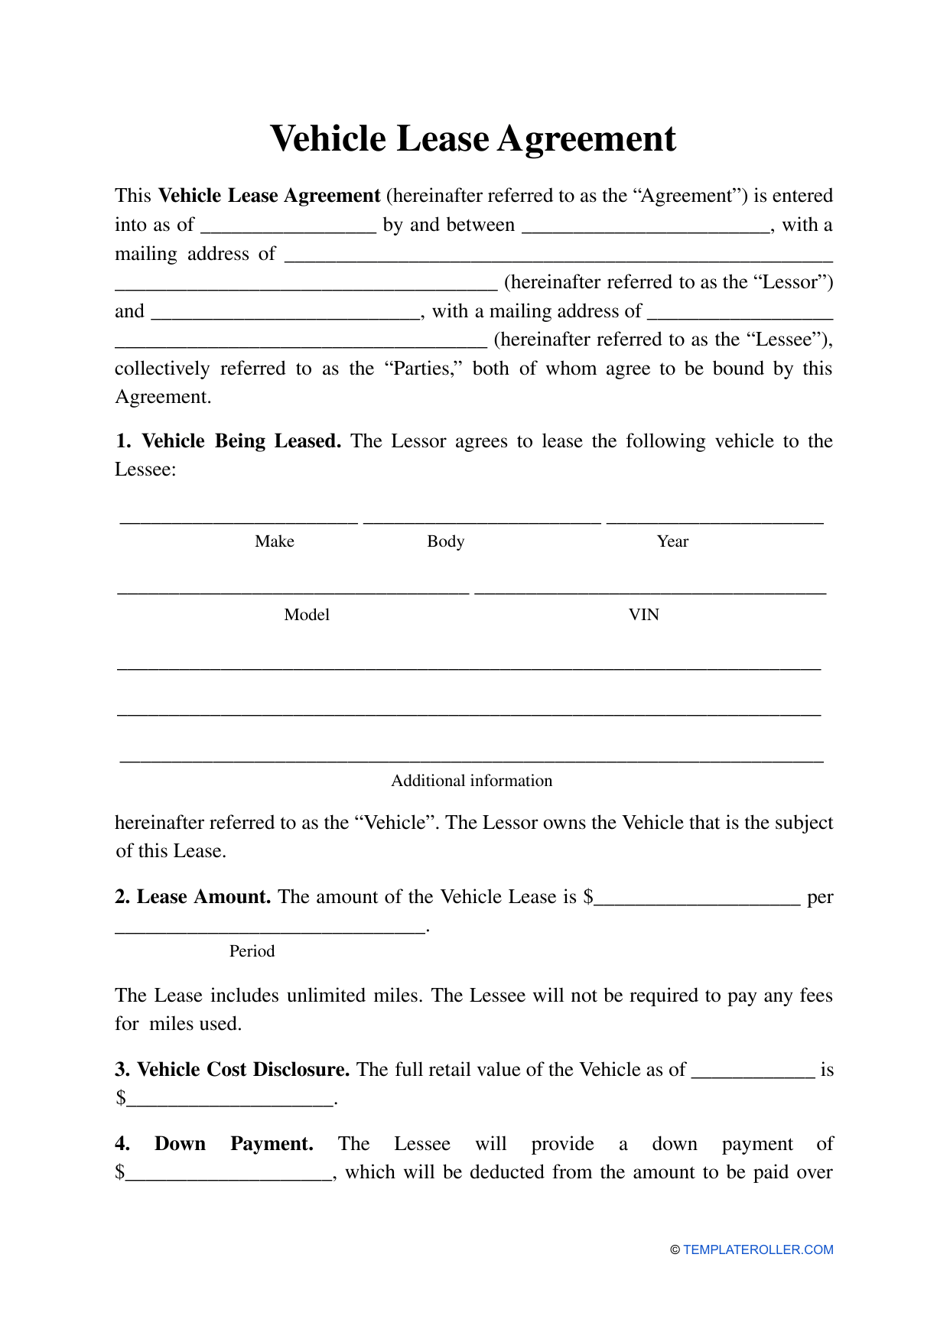 Vehicle Lease Agreement Template, Page 1